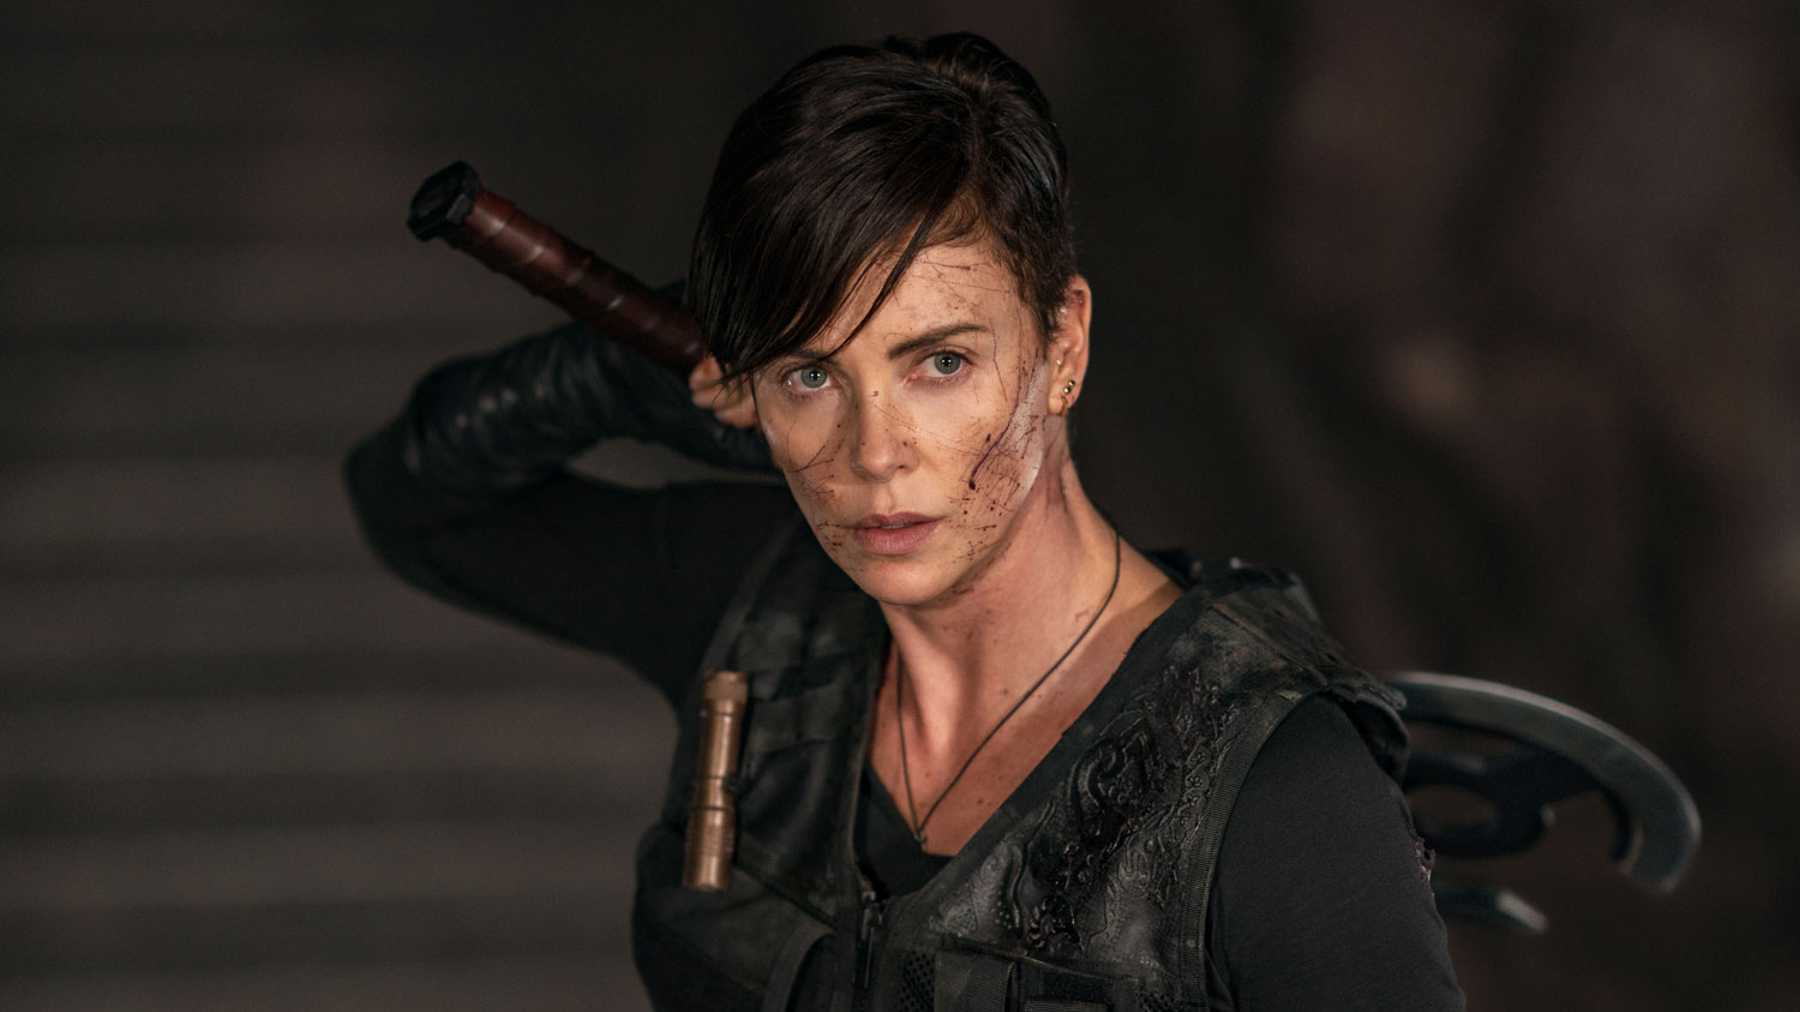 Netflix's 'The Old Guard' stars an immortal, badass Charlize Theron — but  lacks conviction